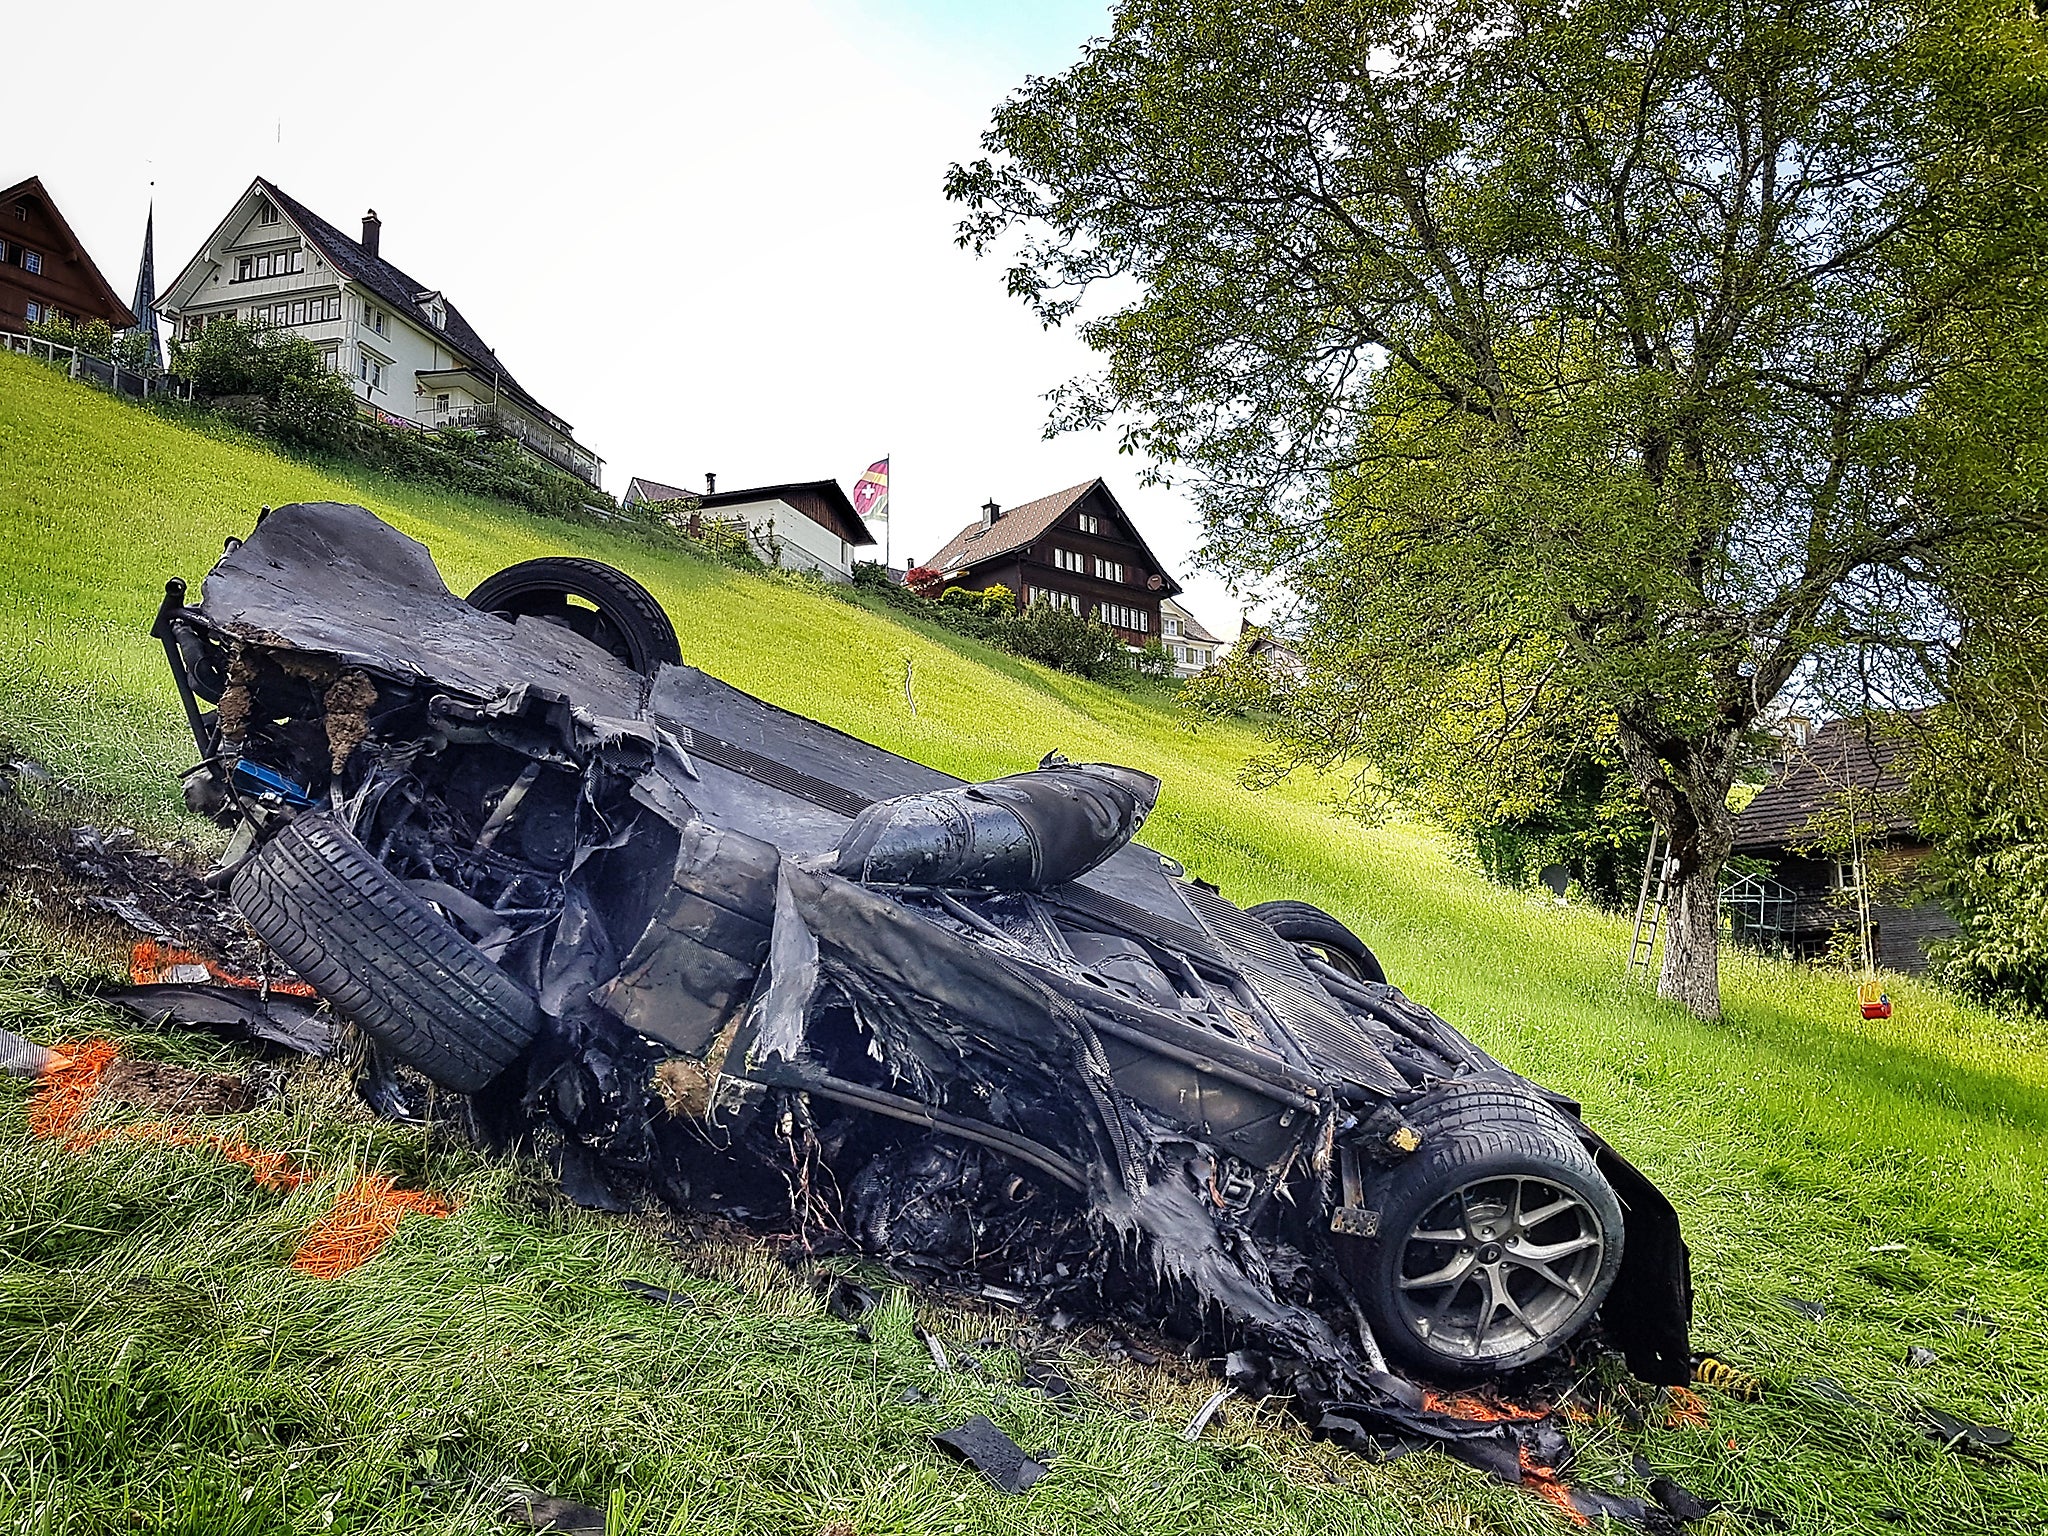 This photo issued by Freuds shows the car that was involved in a crash where Richard Hammond escaped serious injury, in Switzerland